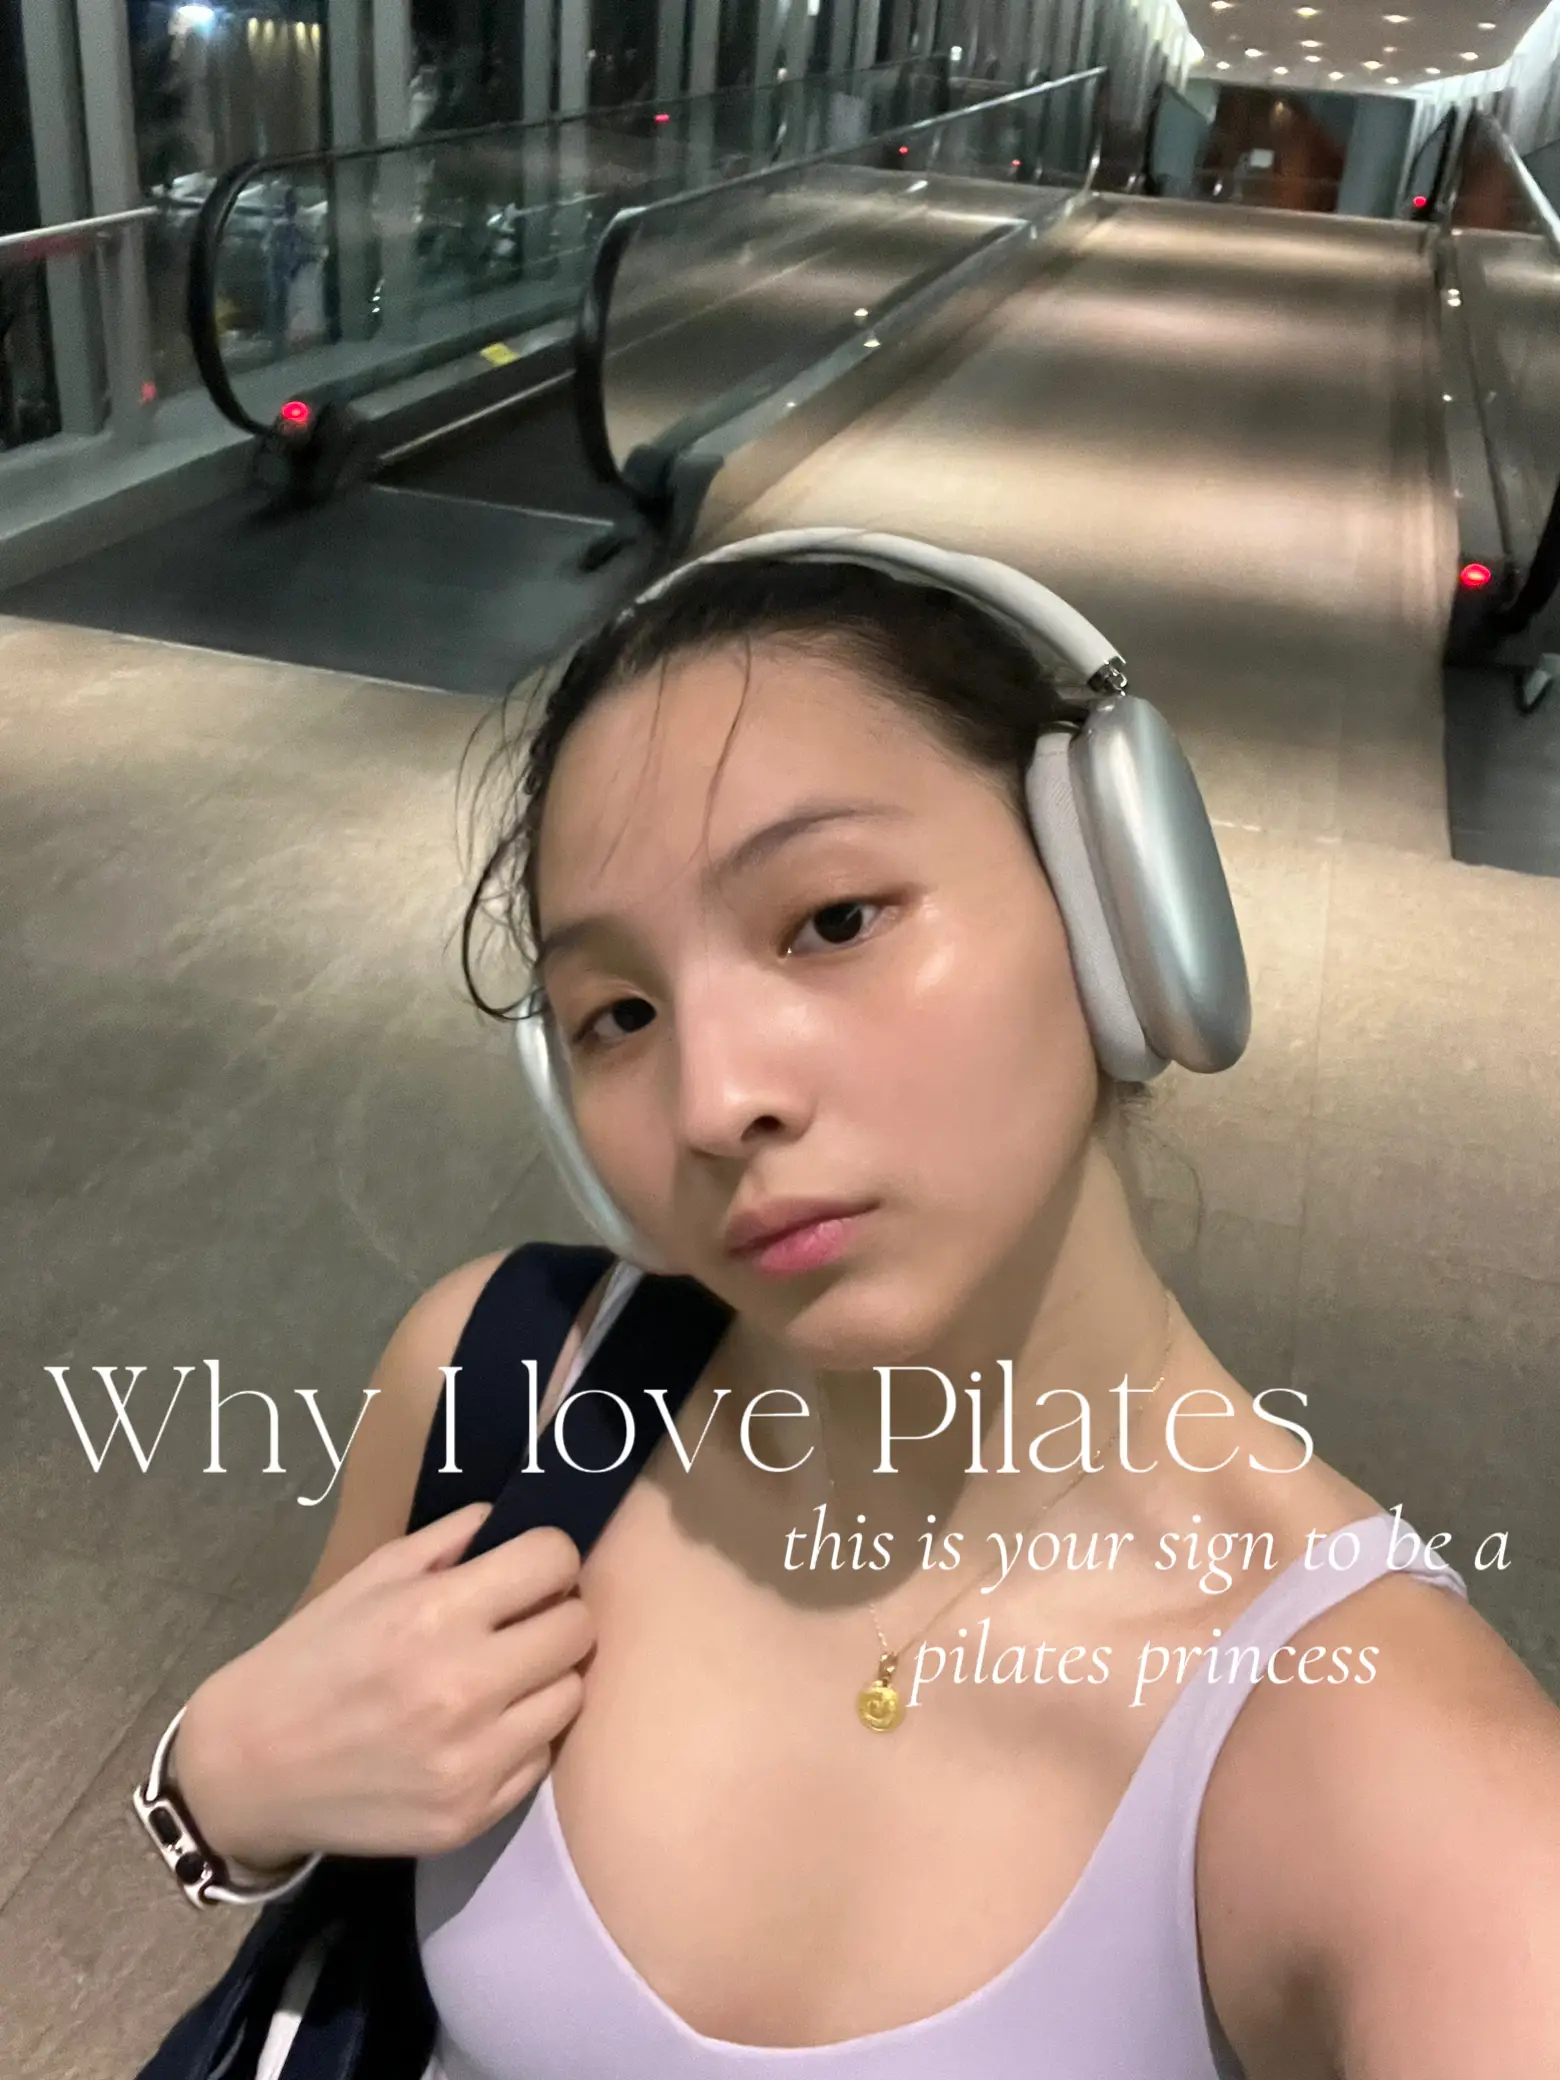 the physical results of pilates after a year 🩰🌸's images